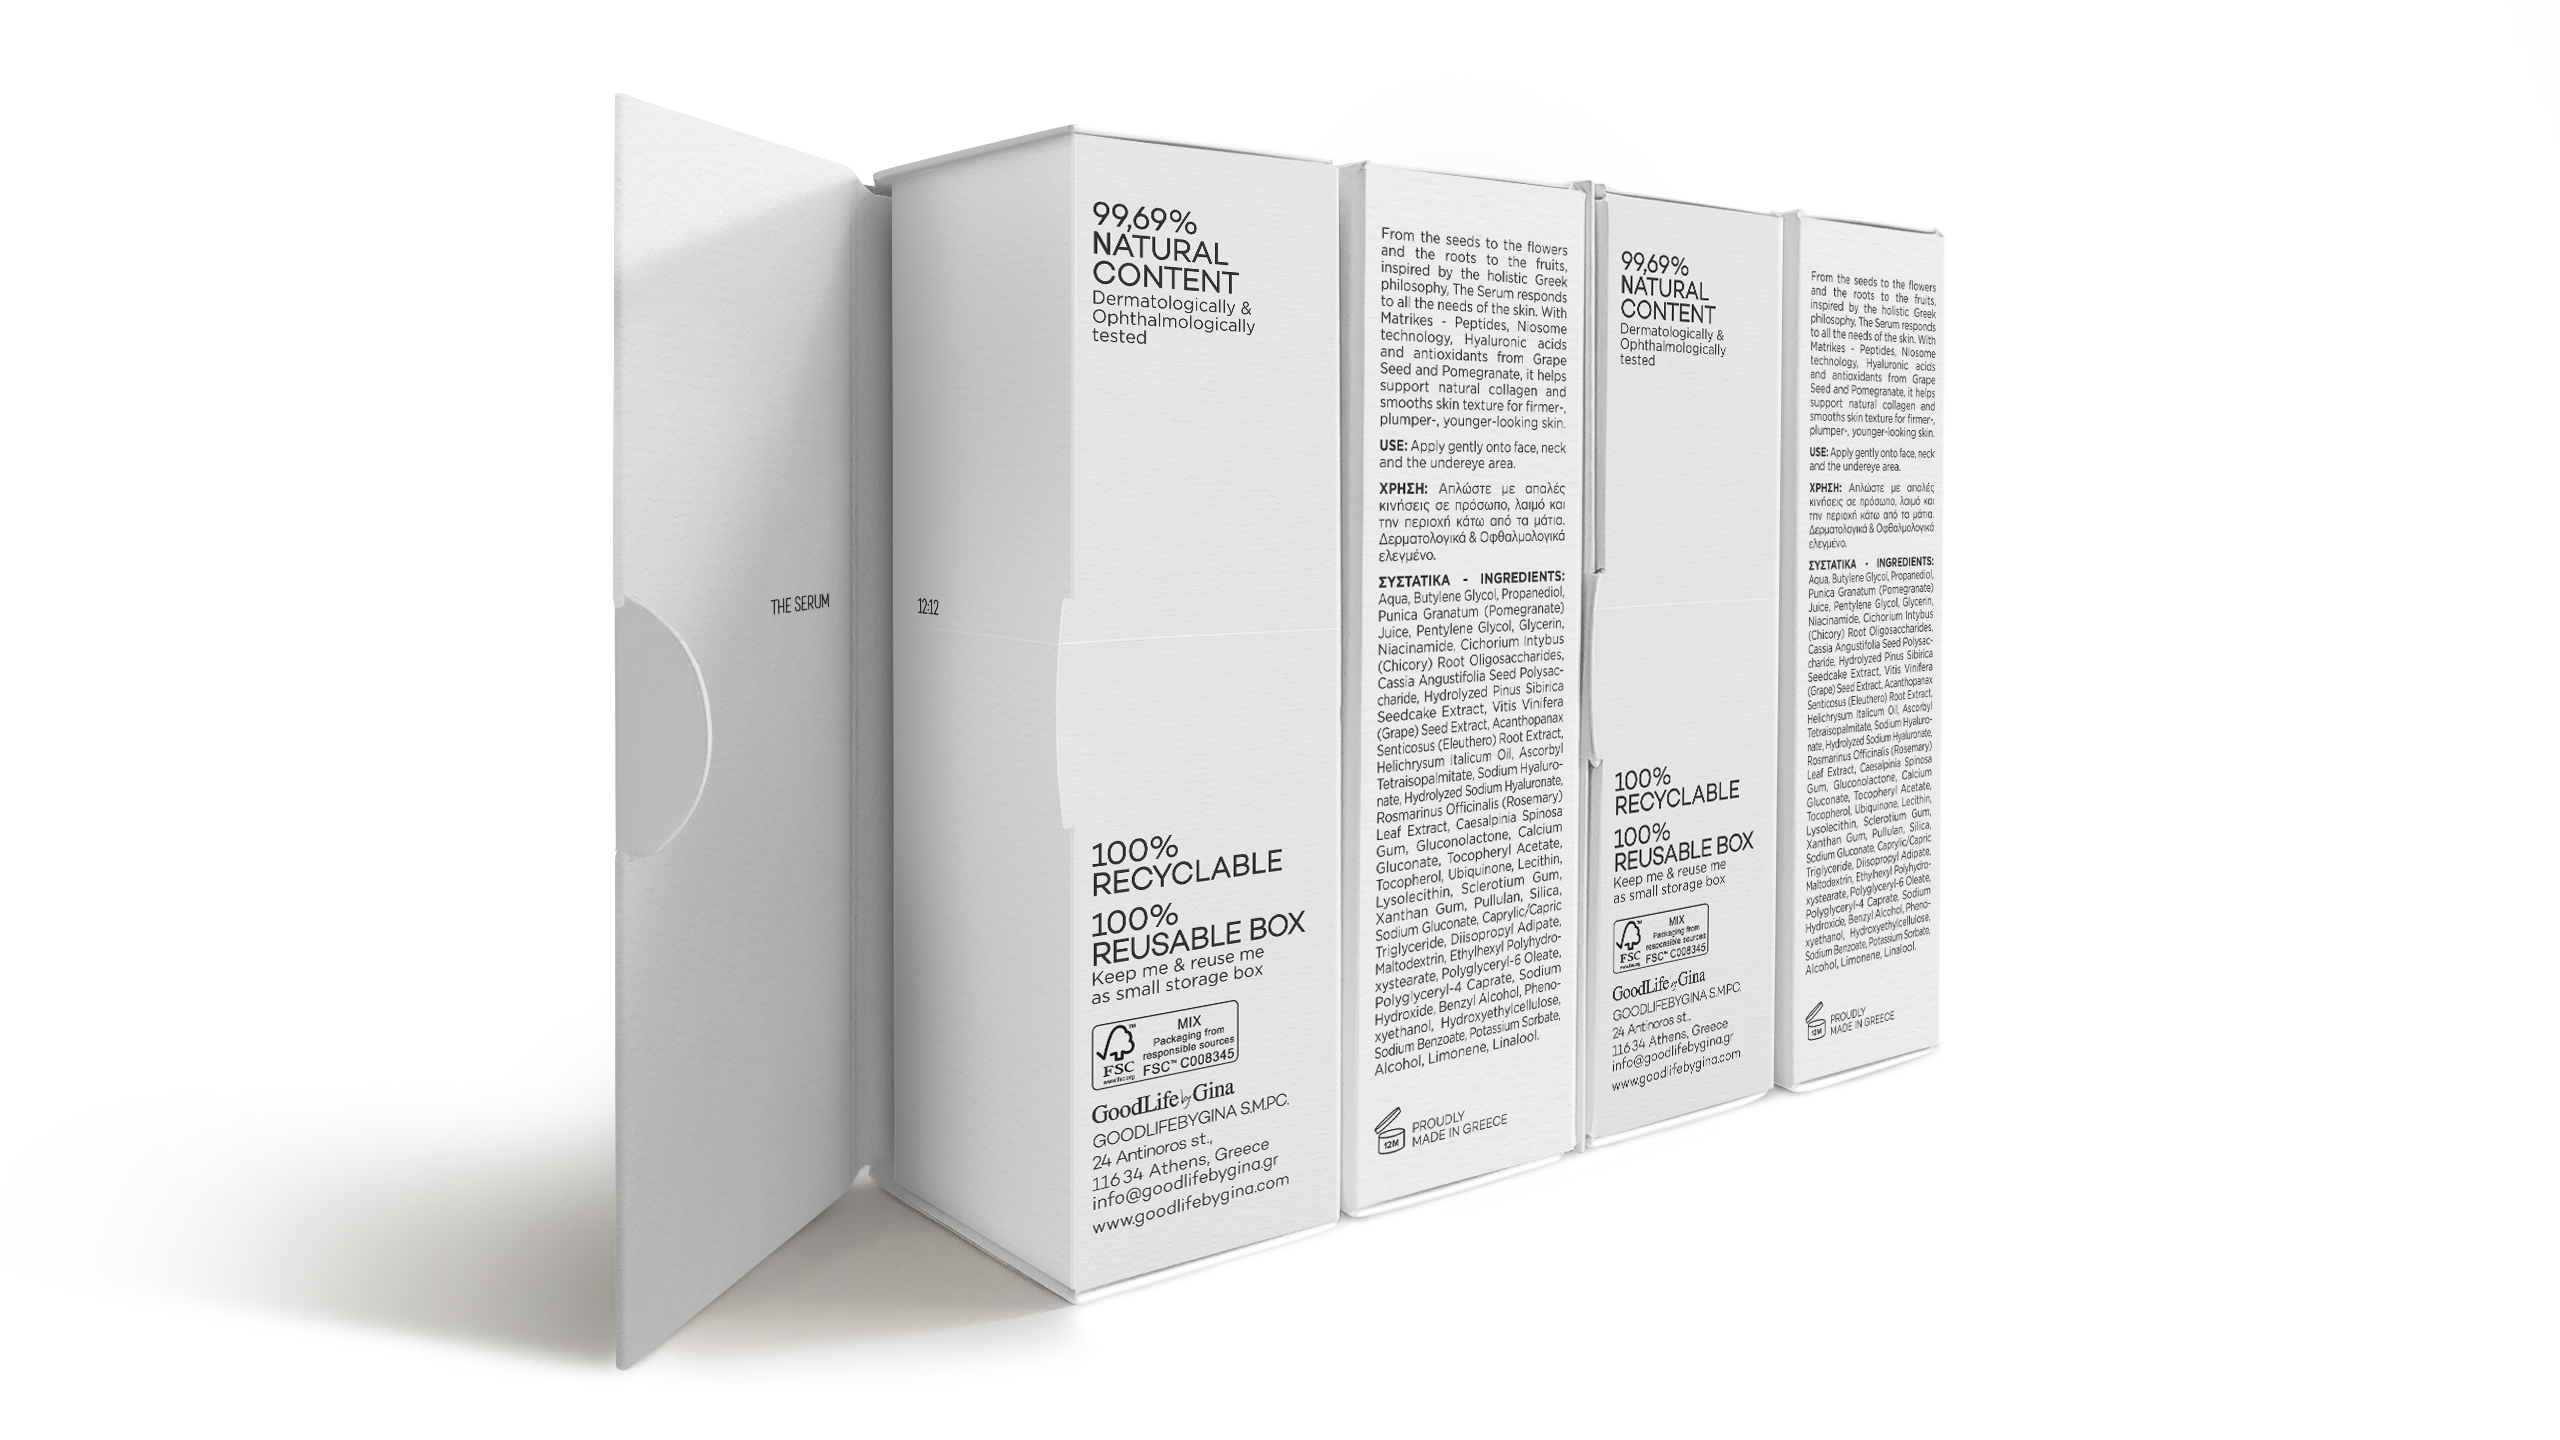 The Serum Branding and Packaging Design for Good Life by Gina